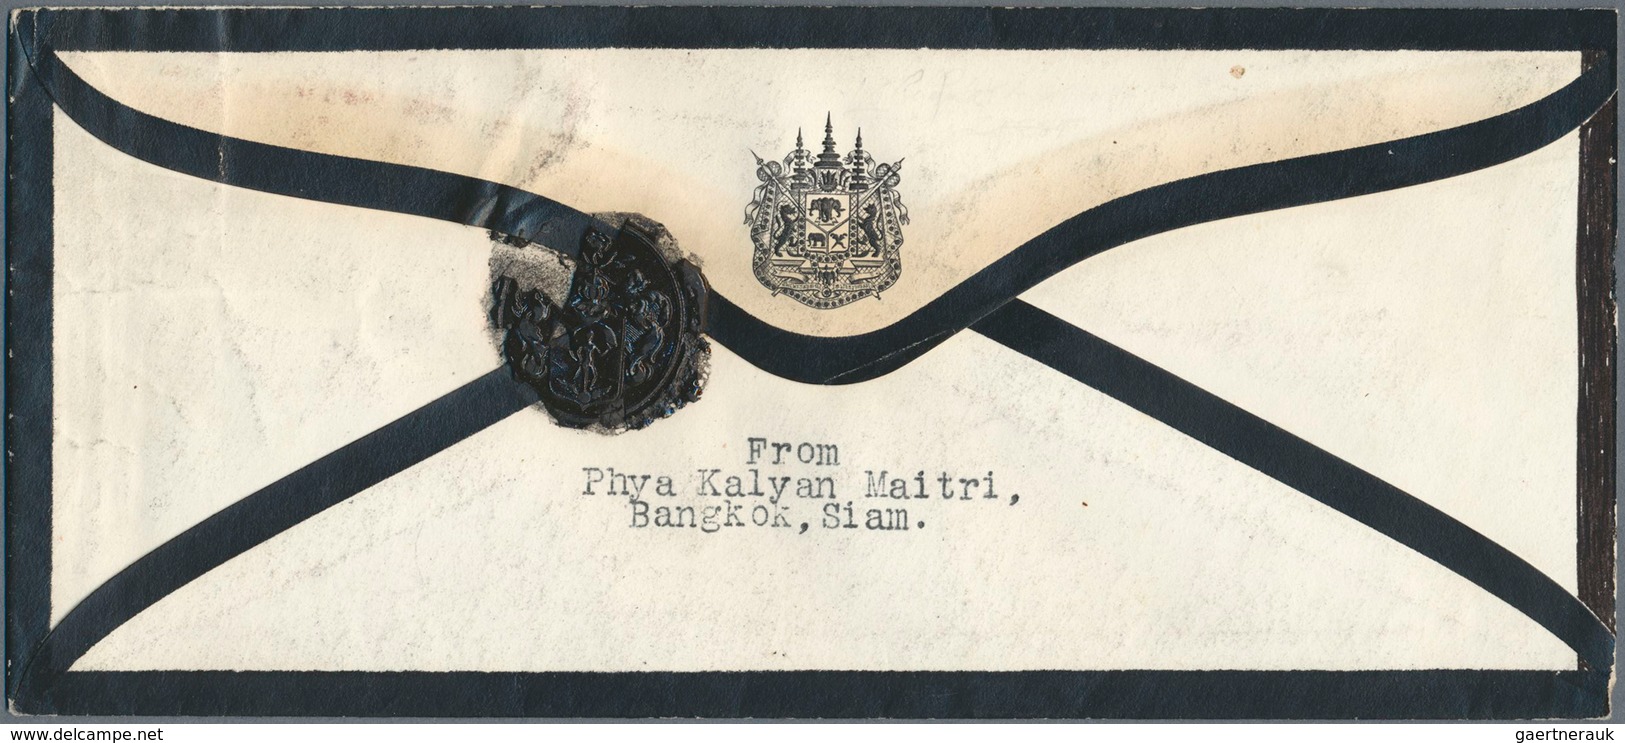 Thailand: 1911 Mourning Cover From Bangkok To Cambridge, Mass., USA Franked By Two Singles Of Both 1 - Thaïlande